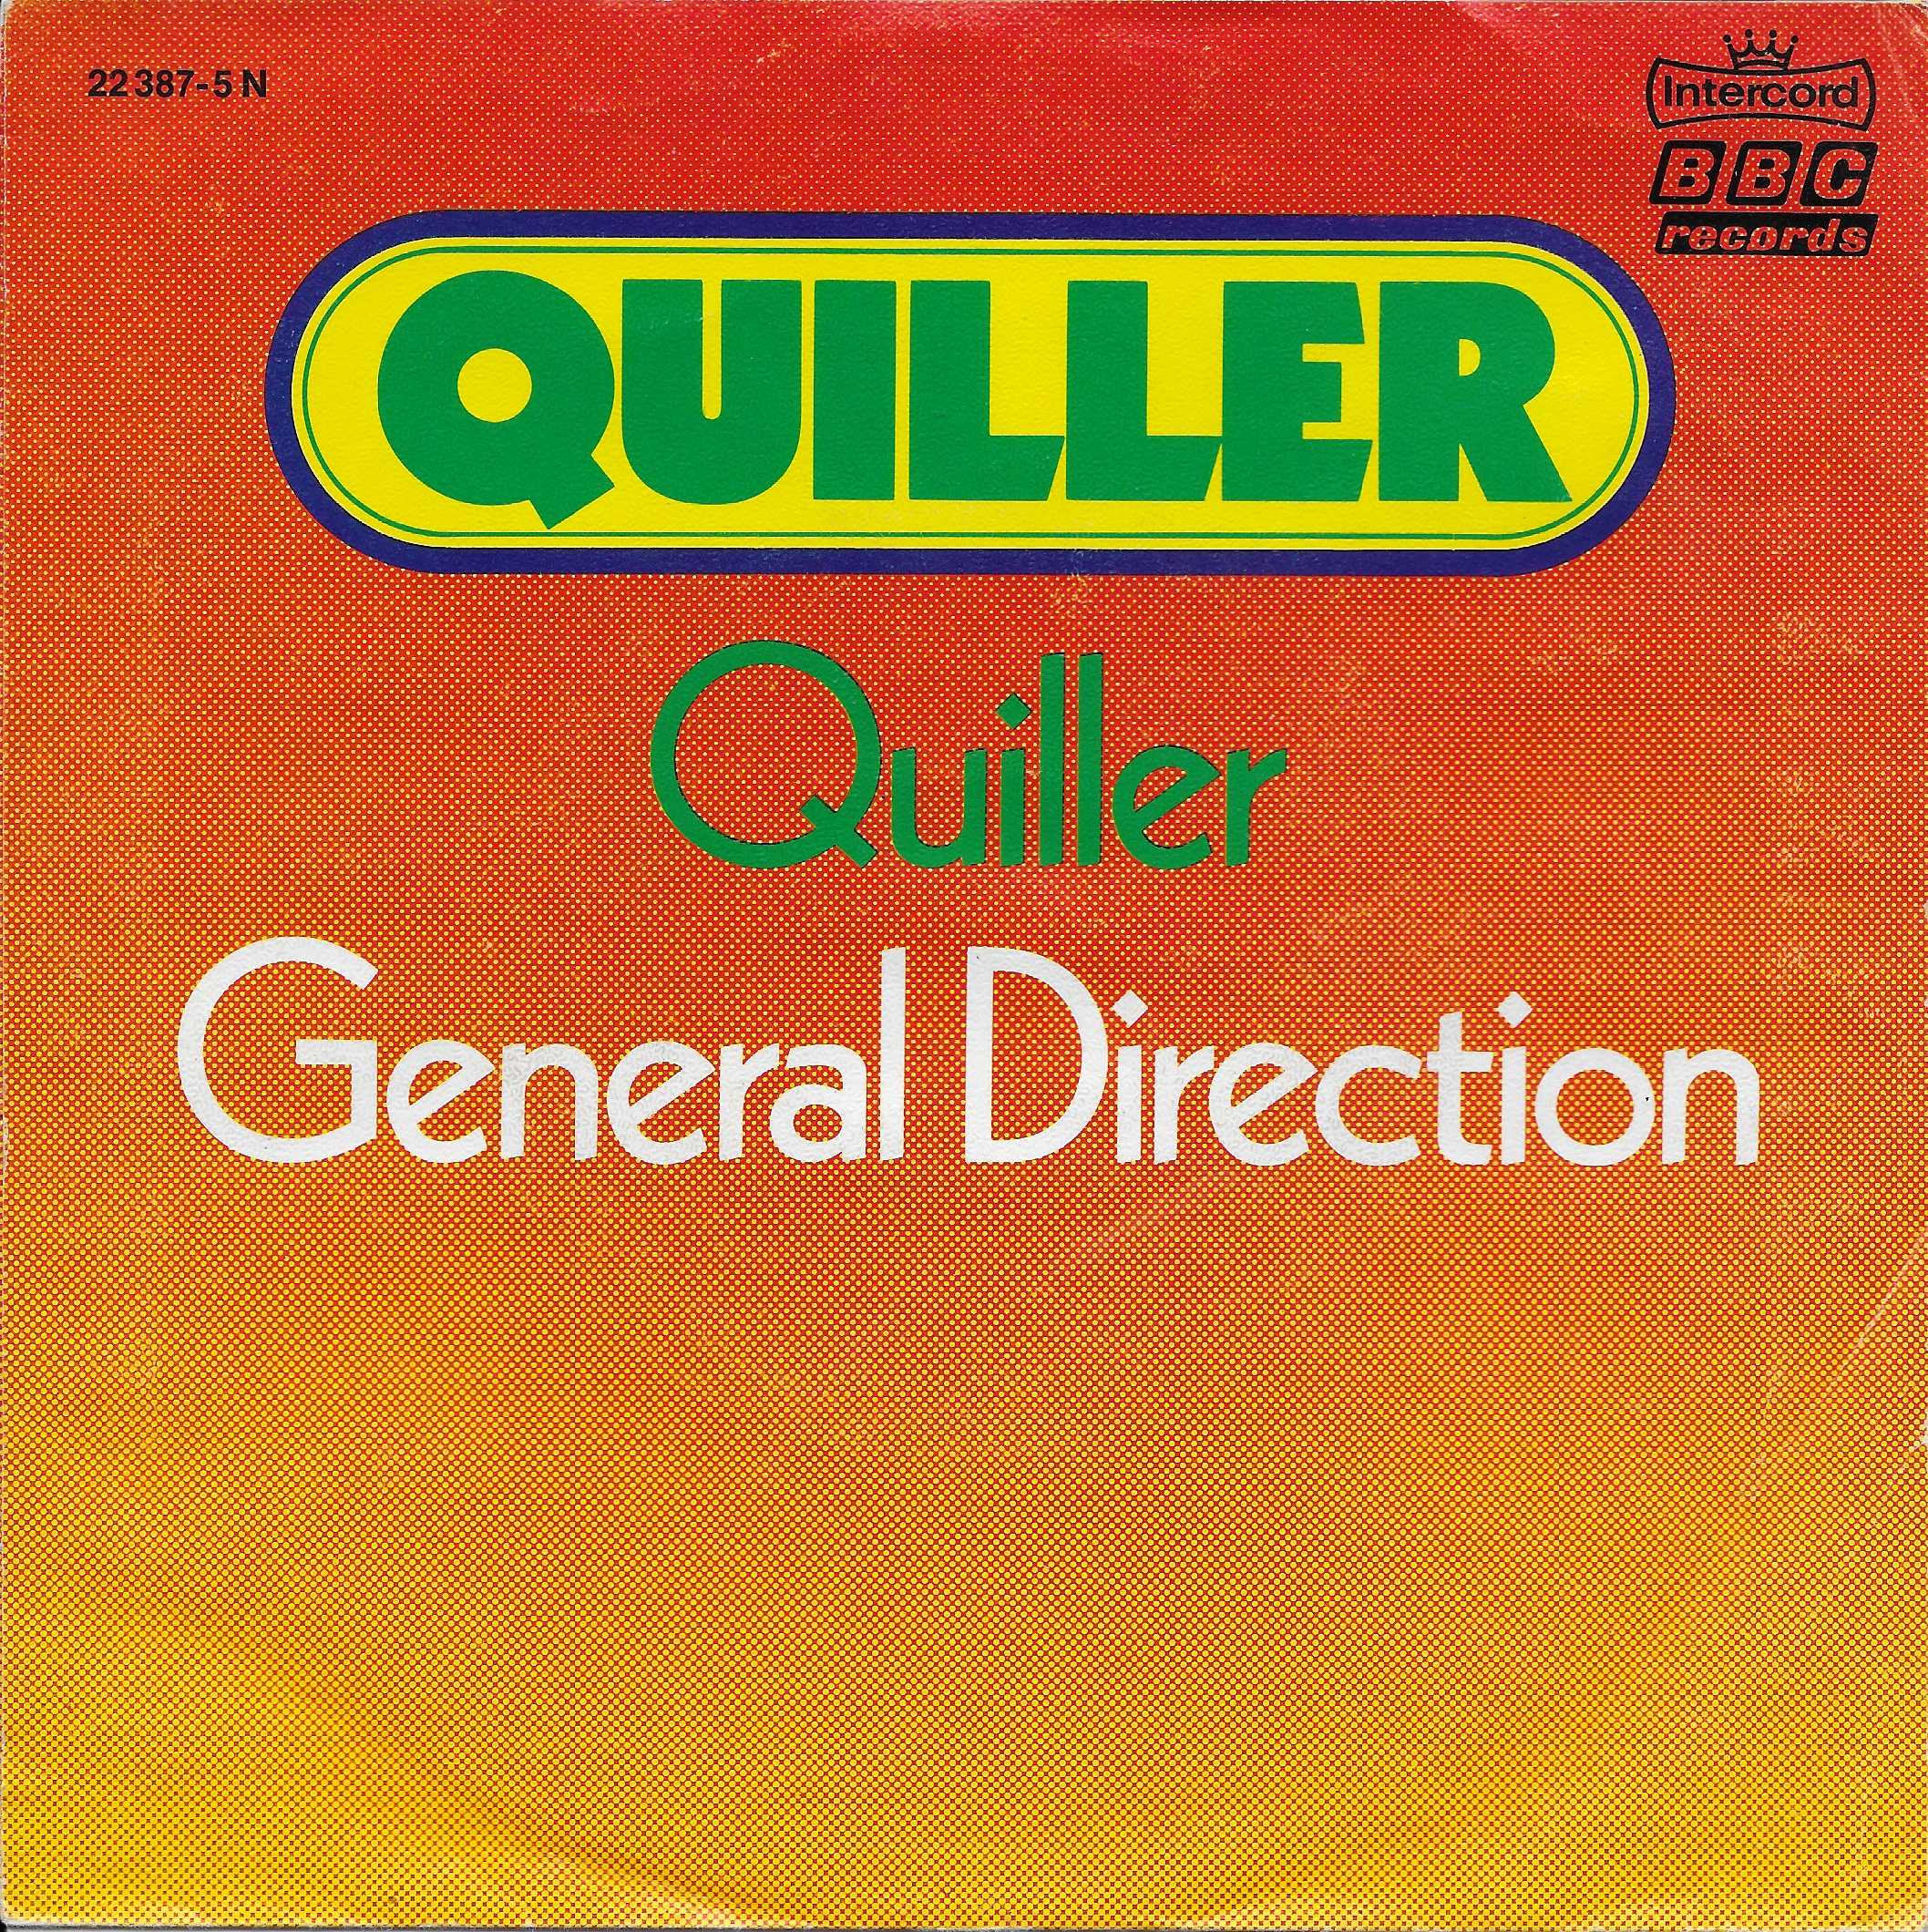 Picture of Quiller by artist Quiller from the BBC singles - Records and Tapes library